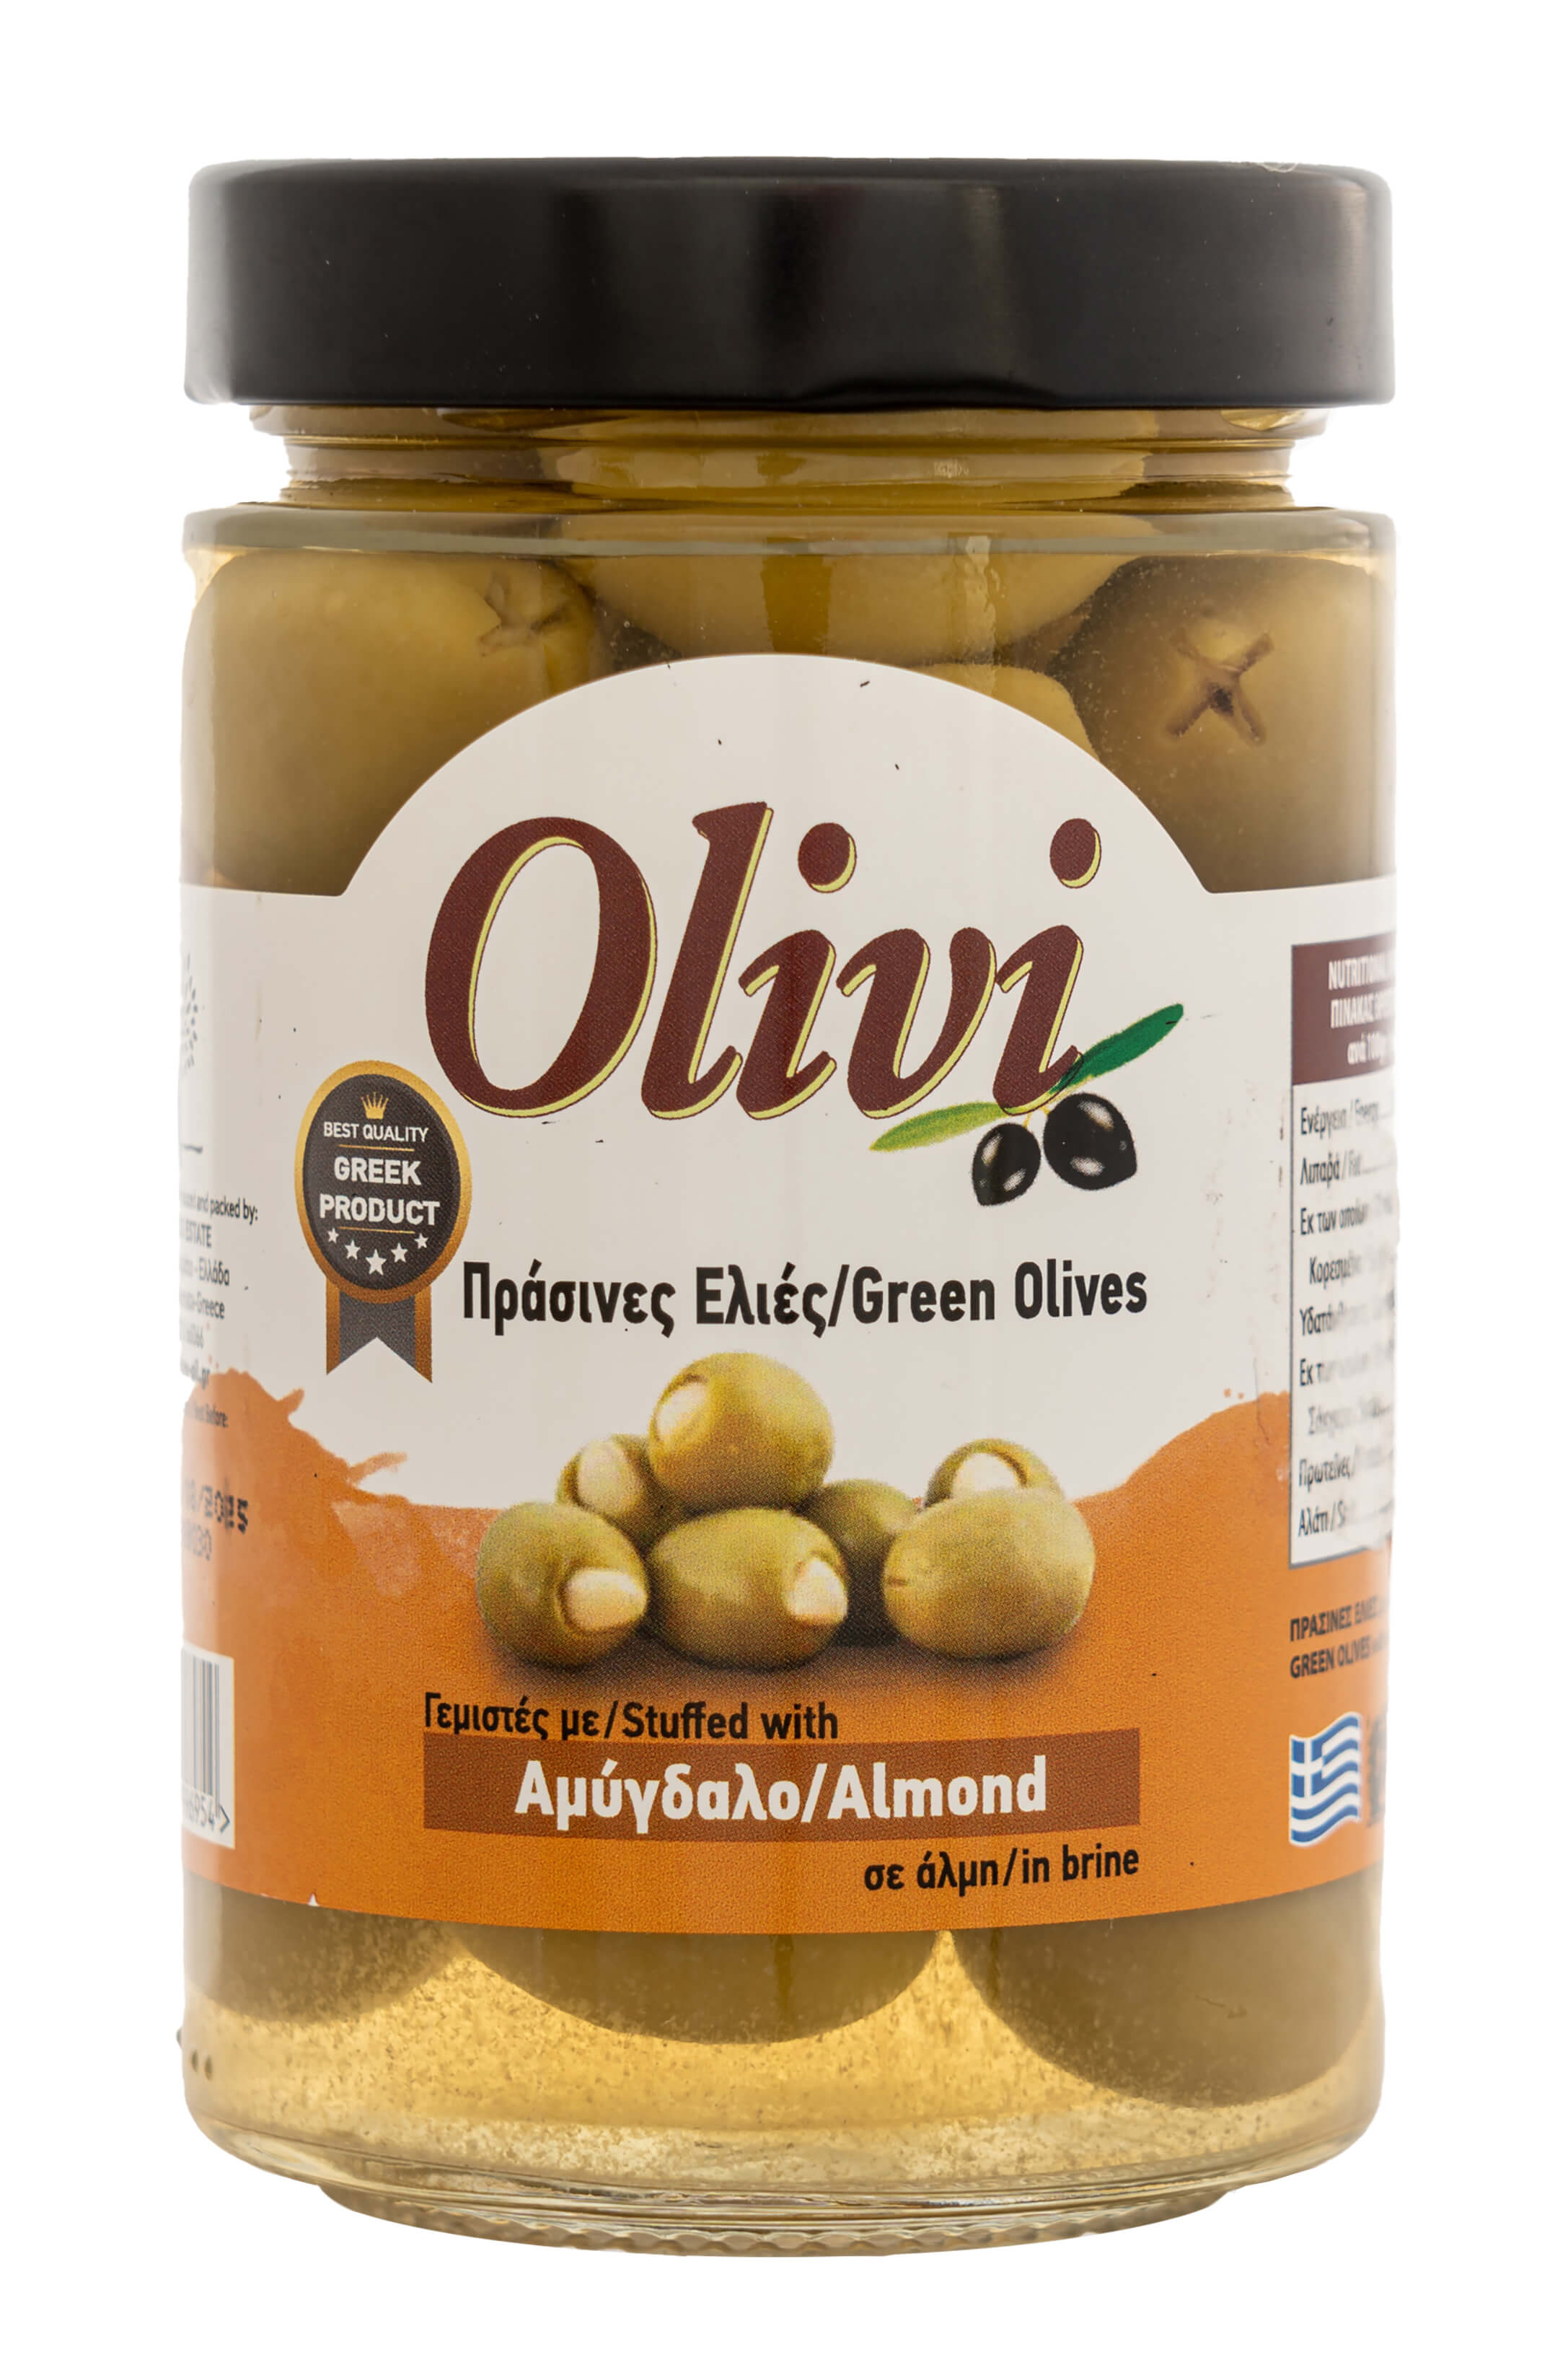 Green Olives stuffed with almonds